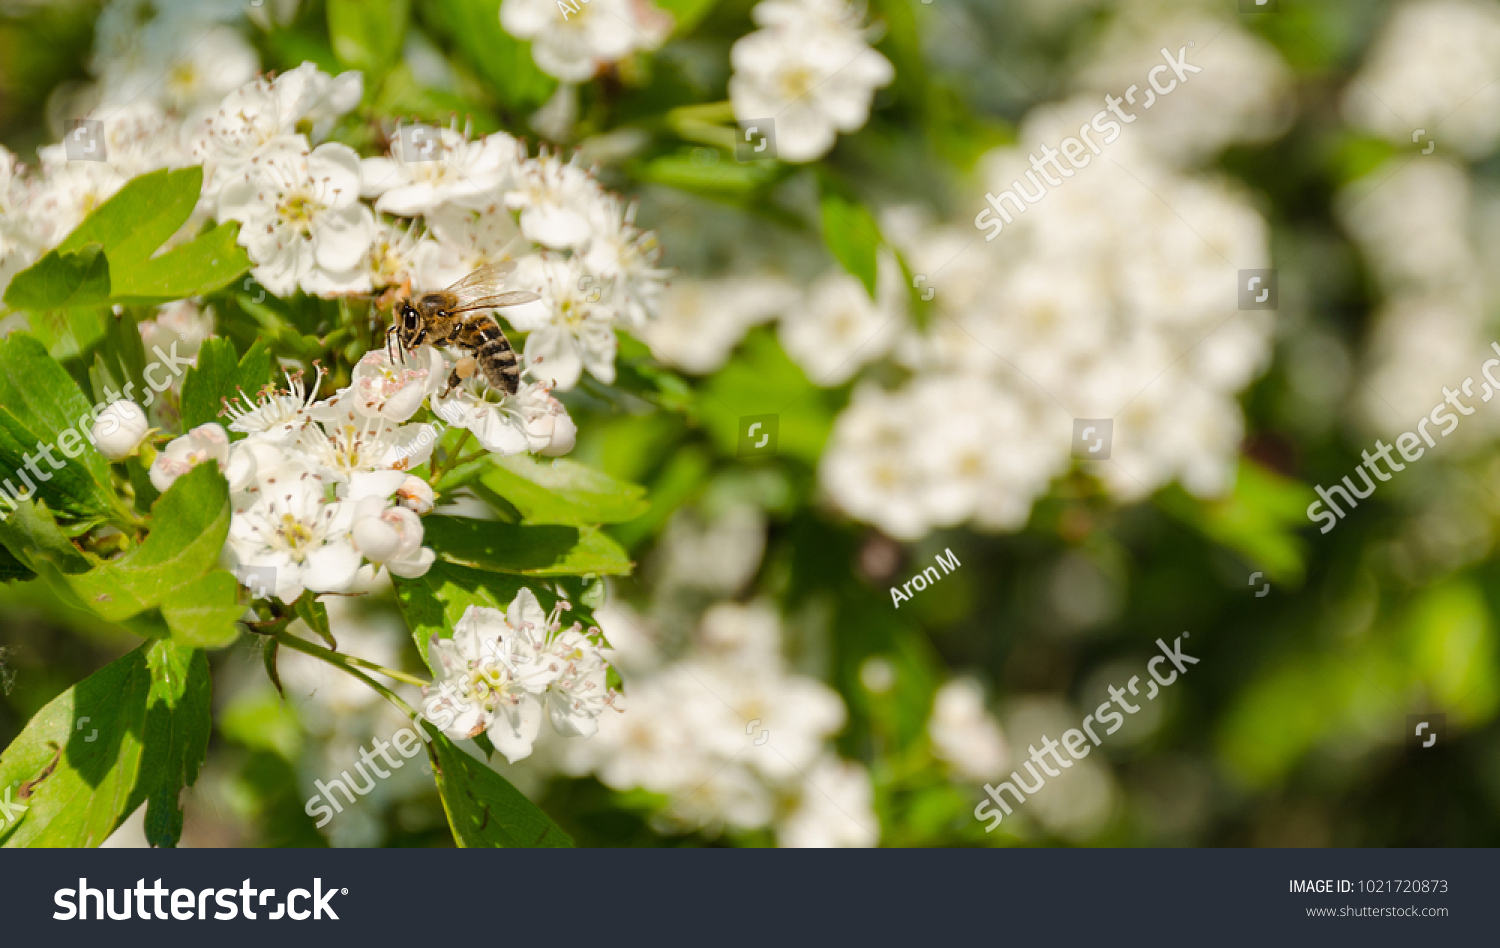 Blooming tree branch and a bee full of pollen, blurred background, in a spring sunny day. #1021720873